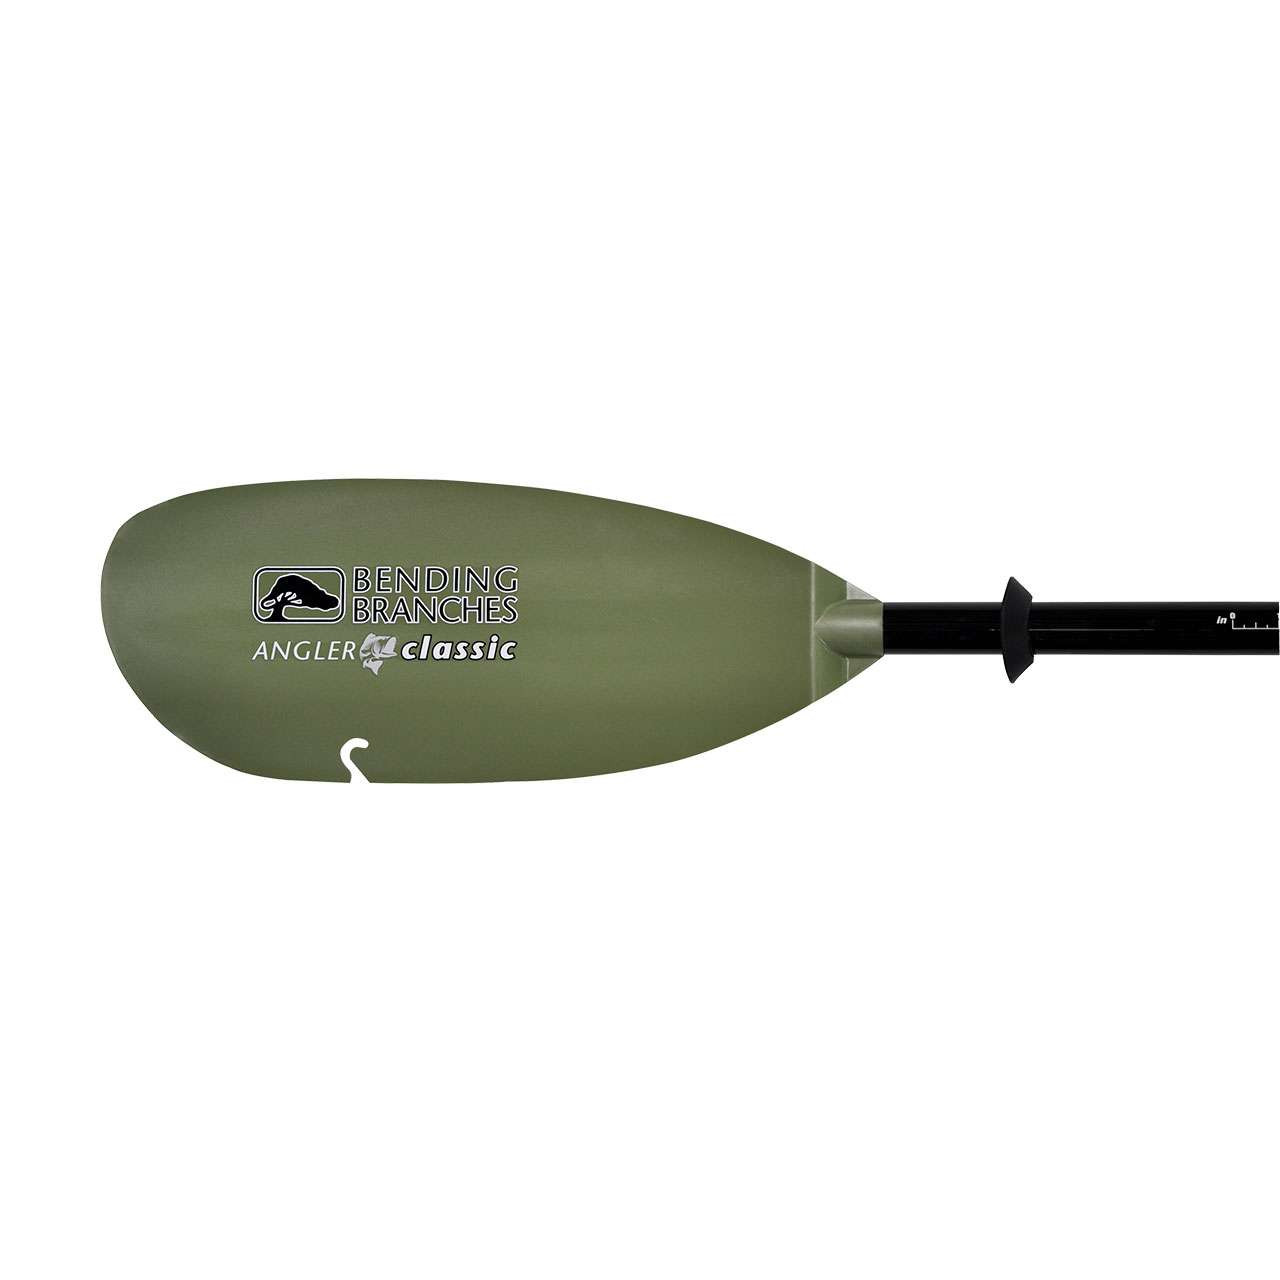 Bending Branches Angler Classic Plus 2-Piece Kayak Paddle